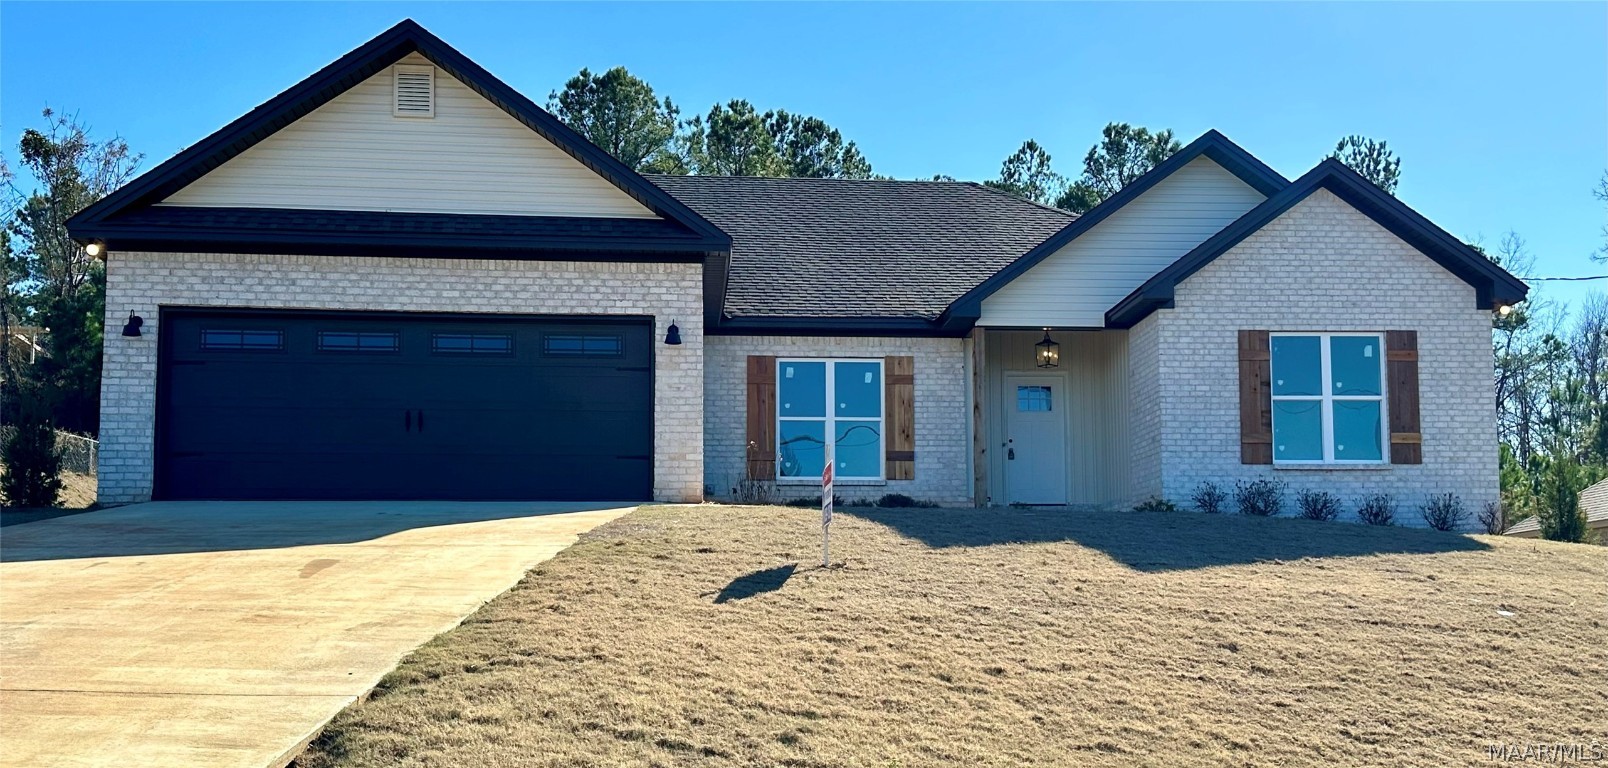 BUILDER will contribute $7500 in seller concessions. You can use this for closing costs, buying down your interest rate, etc.  Affordable new build in the Redland school district!  4 bedrooms/ 2.5 baths/ outdoor fireplace/ located in a small, quiet subdivision off Dozier Rd in the Redland community of Wetumpka, AL.  Great open floor plan with vaulted ceilings in the great room and guest bedroom.  LVP located throughout the house- beautiful water and scratch resistant flooring.  Custom made cabinets, quartz counter tops- such a soothing finish! There is also a separate dining room area- no dining room furniture?  No problem- use it as a separate den, playroom or office. You will love the closet space in this one- especially the Master closet!  Come take a look today!!